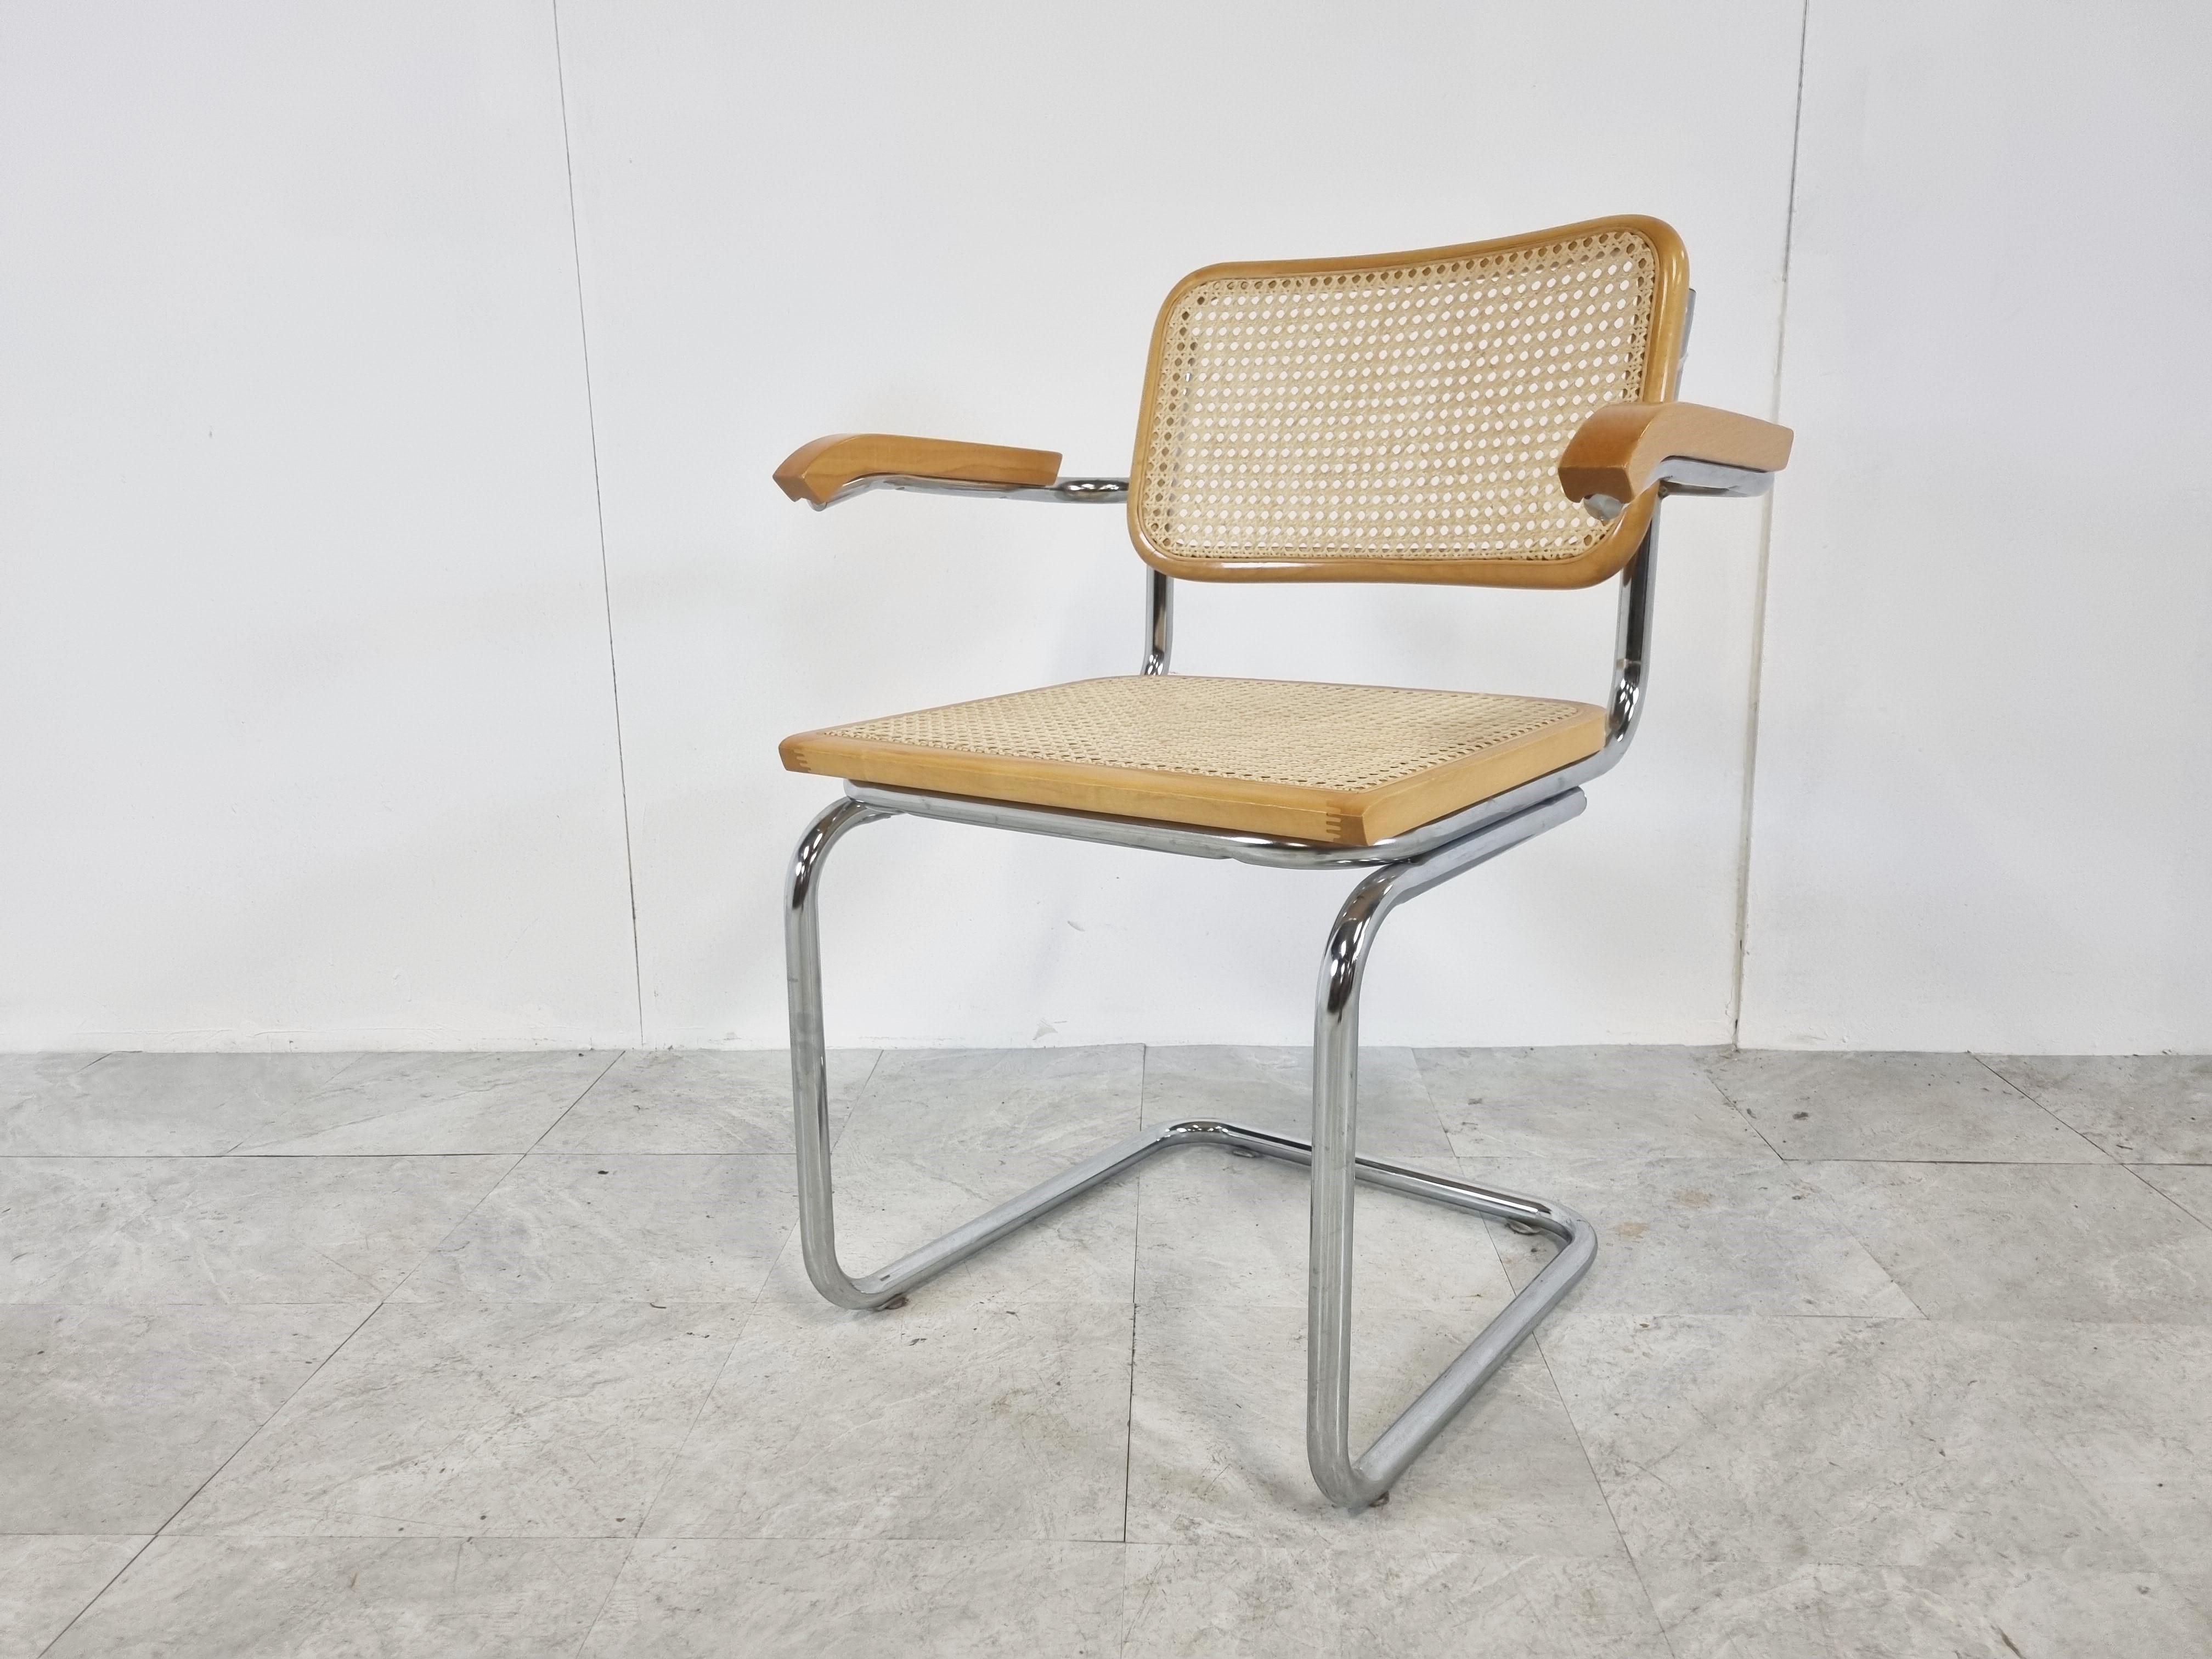 Cane Marcel Breuer Style Armchair, Made in Italy, 1970s